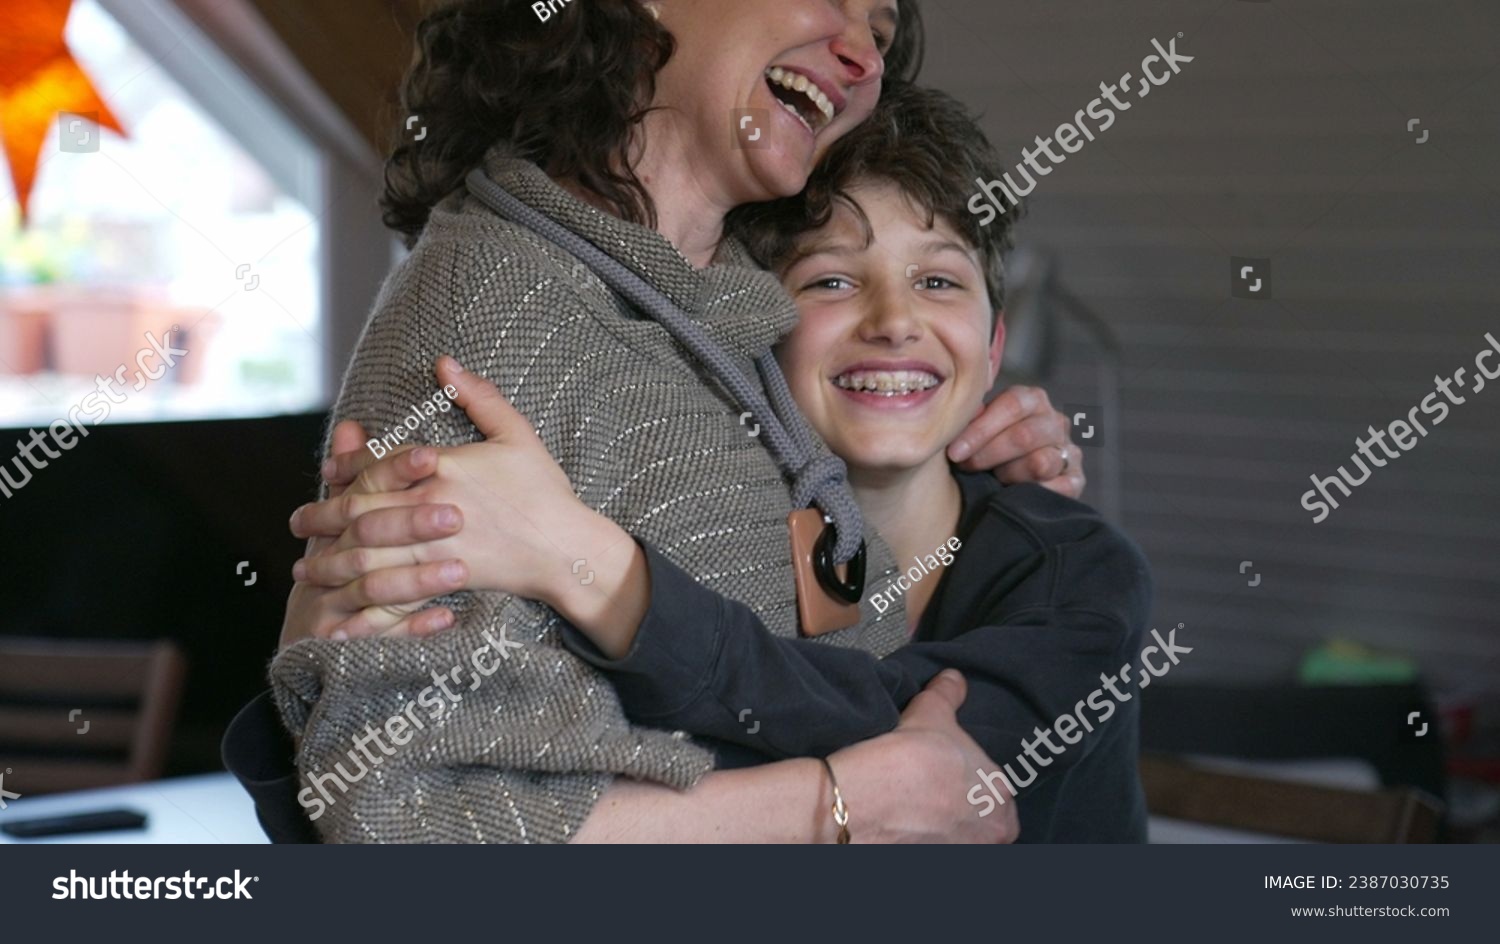 Candid mother and pre-teen boy laughing together. Authentic moment of family lifestyle joy with child with arm around mom in affectionate embrace #2387030735